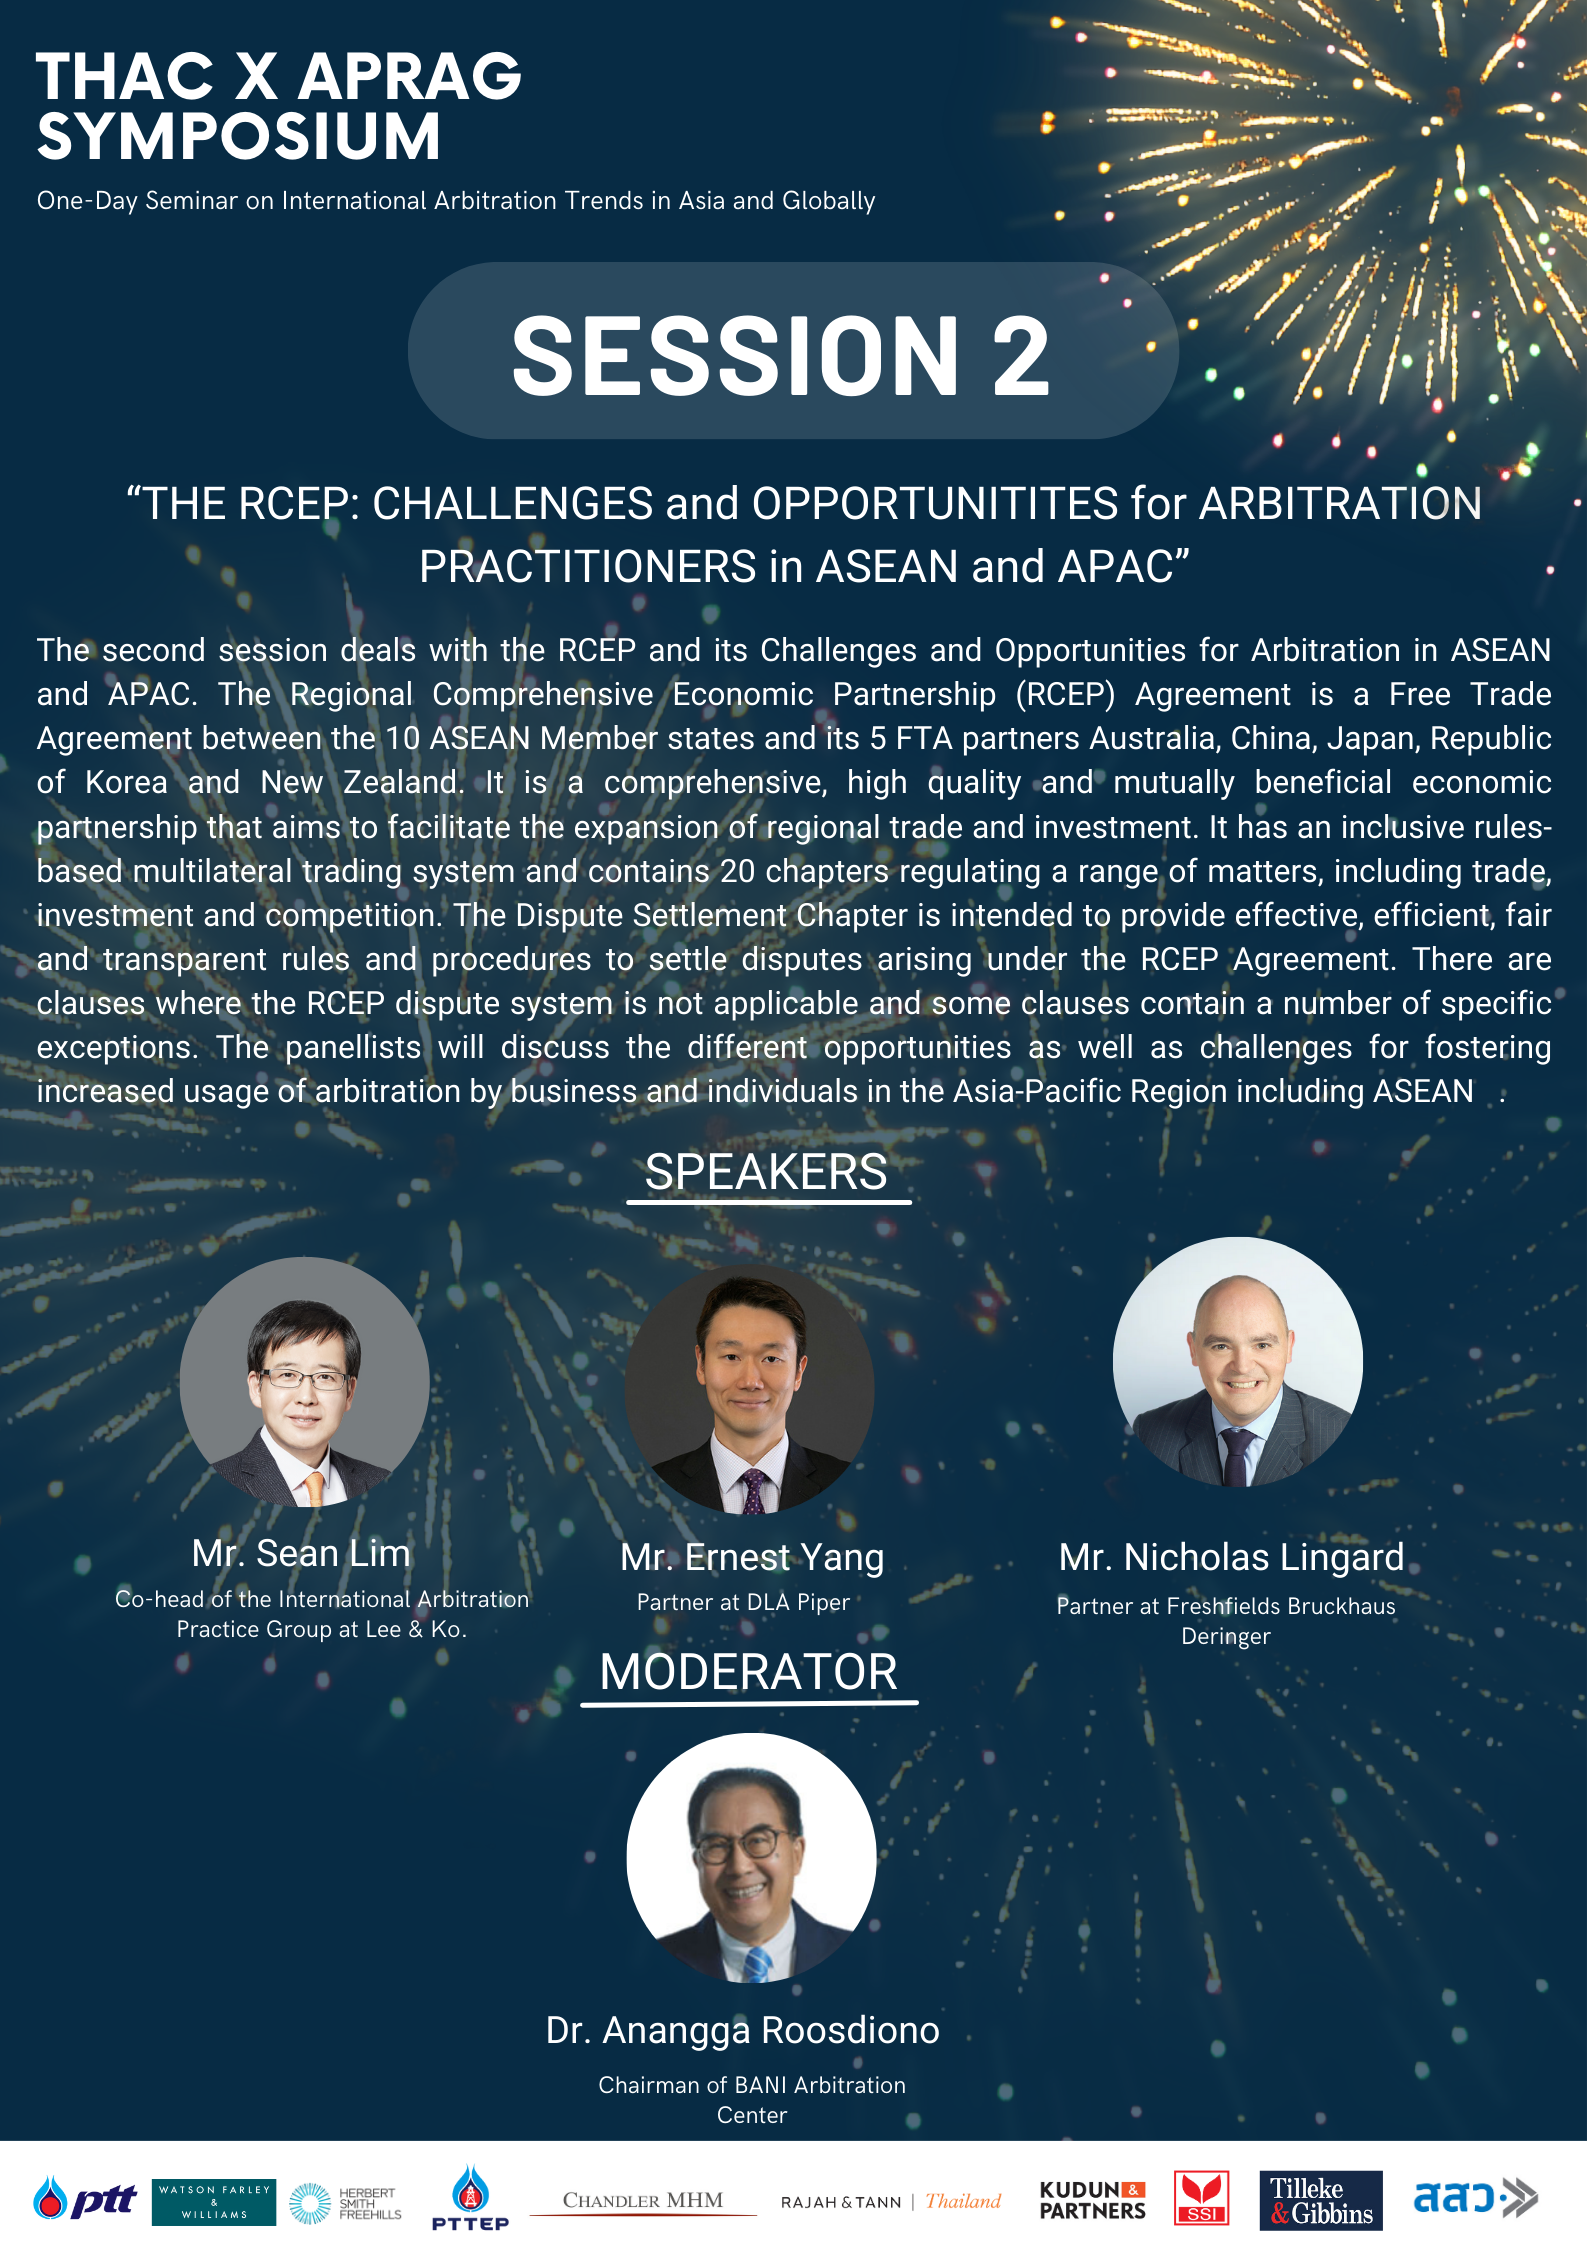 THAC x APRAG Symposium: One-Day Seminar on International Arbitration Trends in Asia and Globally